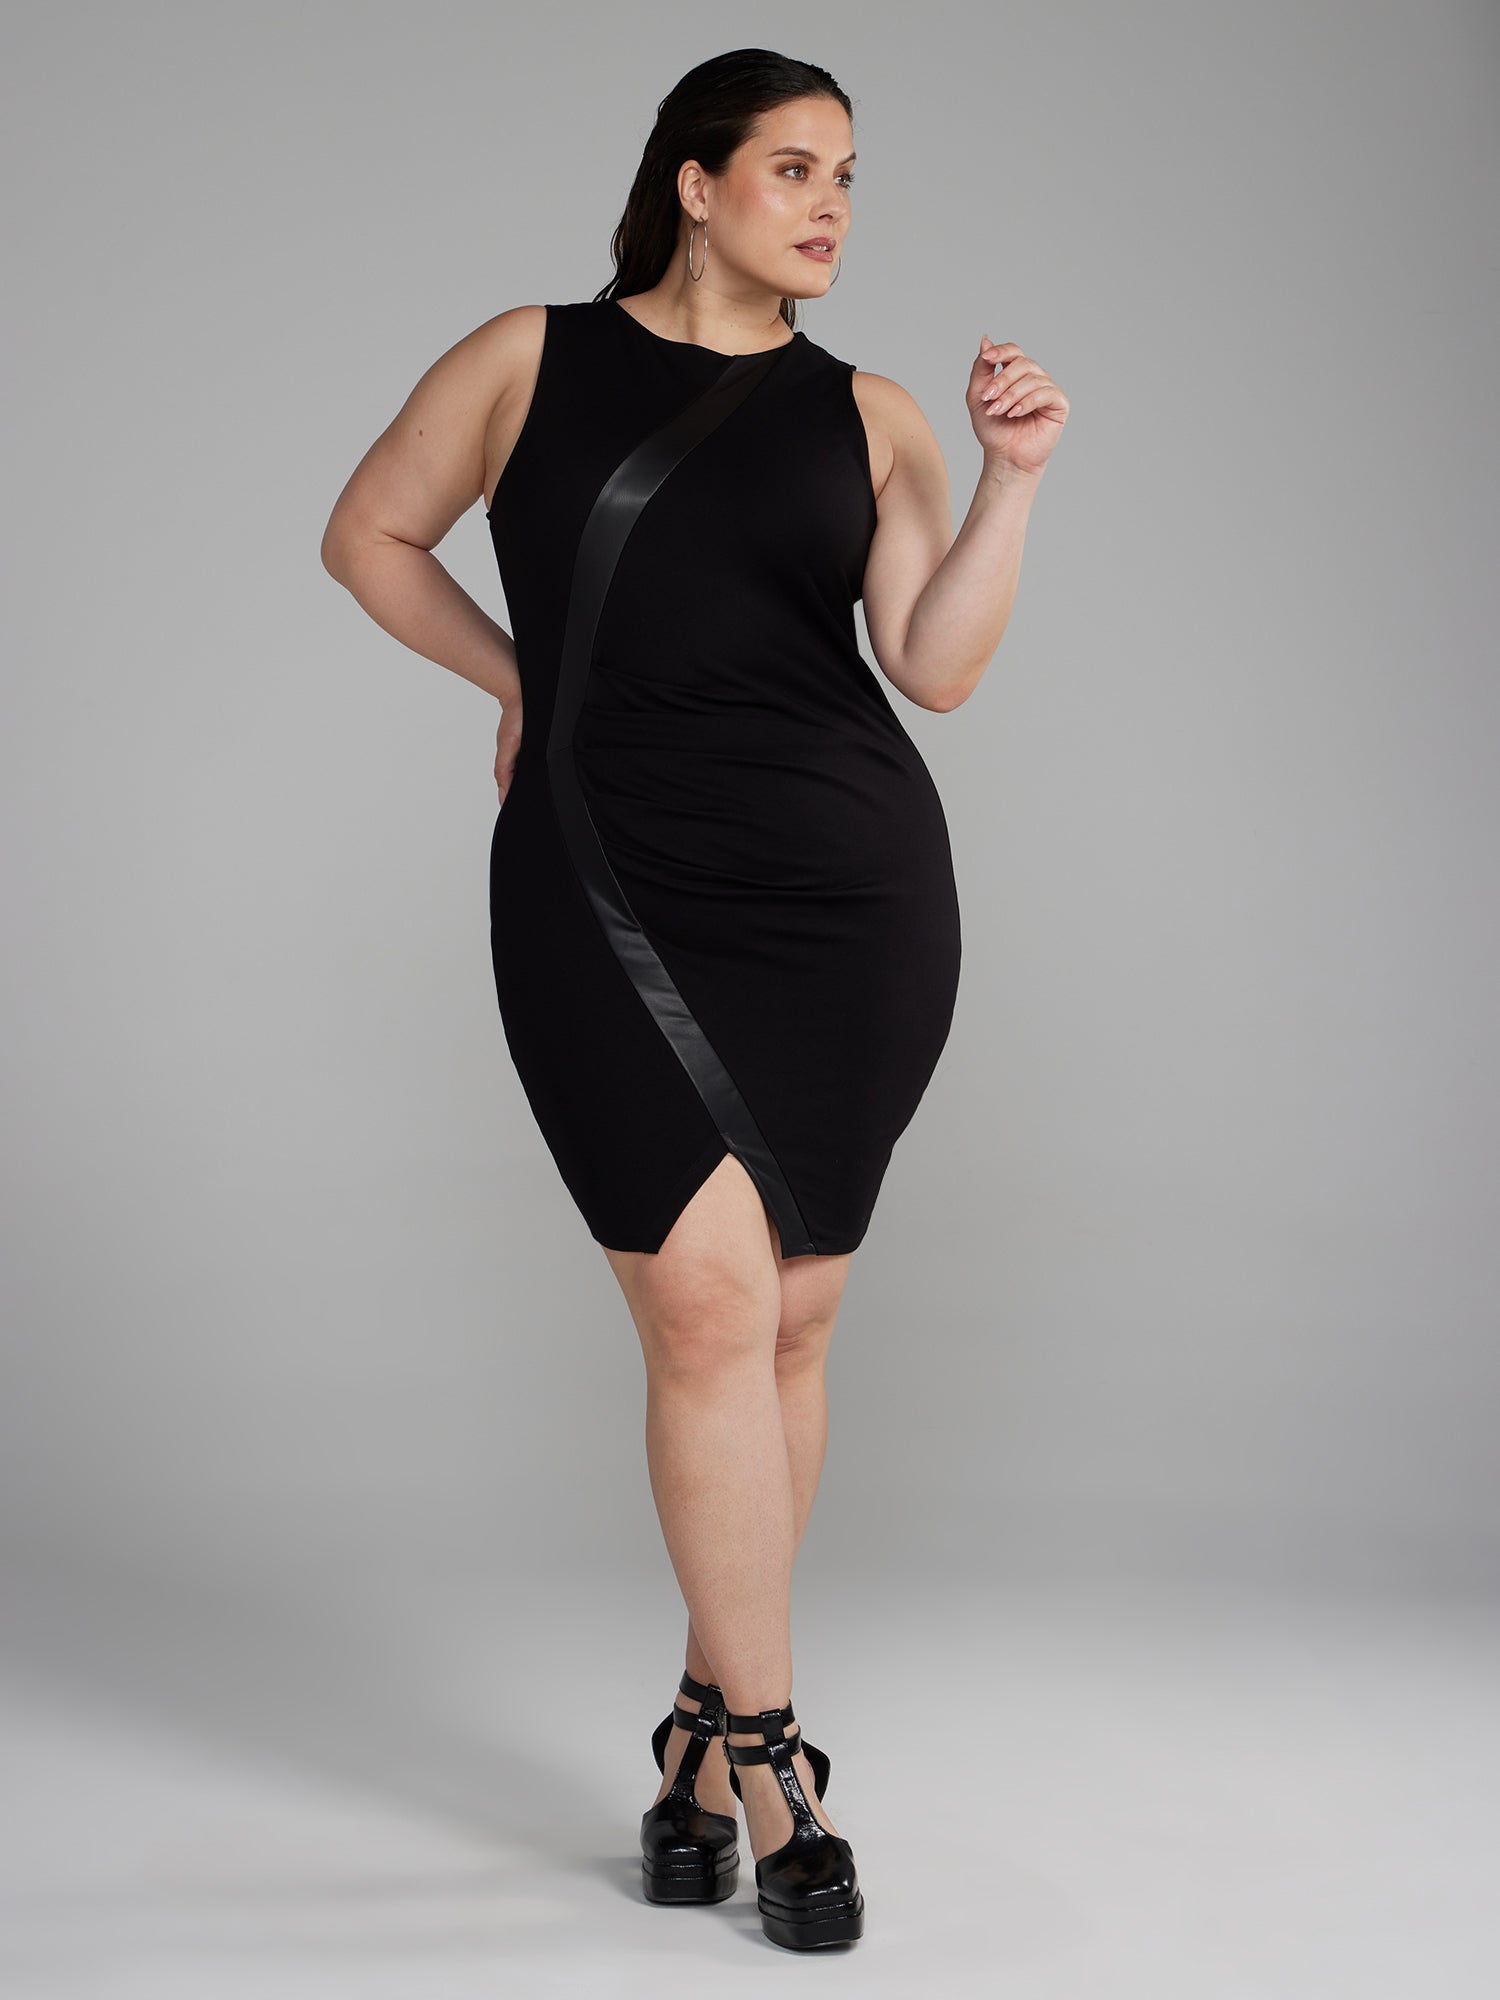 Fashion To Figure, Plus Size Clothing and Fashion for Women